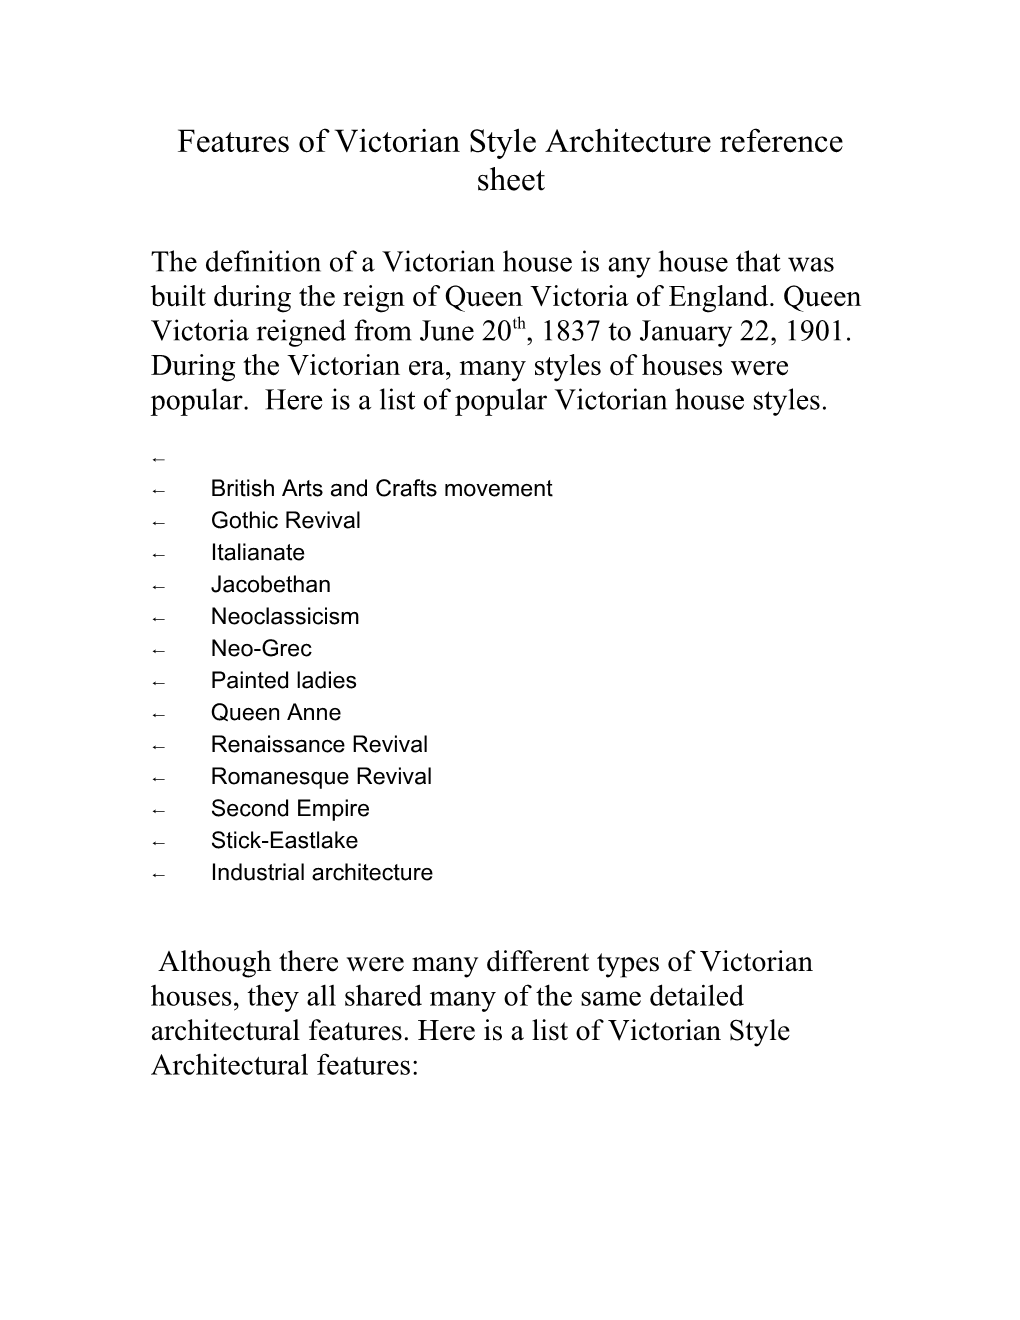 Features of Victorian Style Architecture Reference Sheet